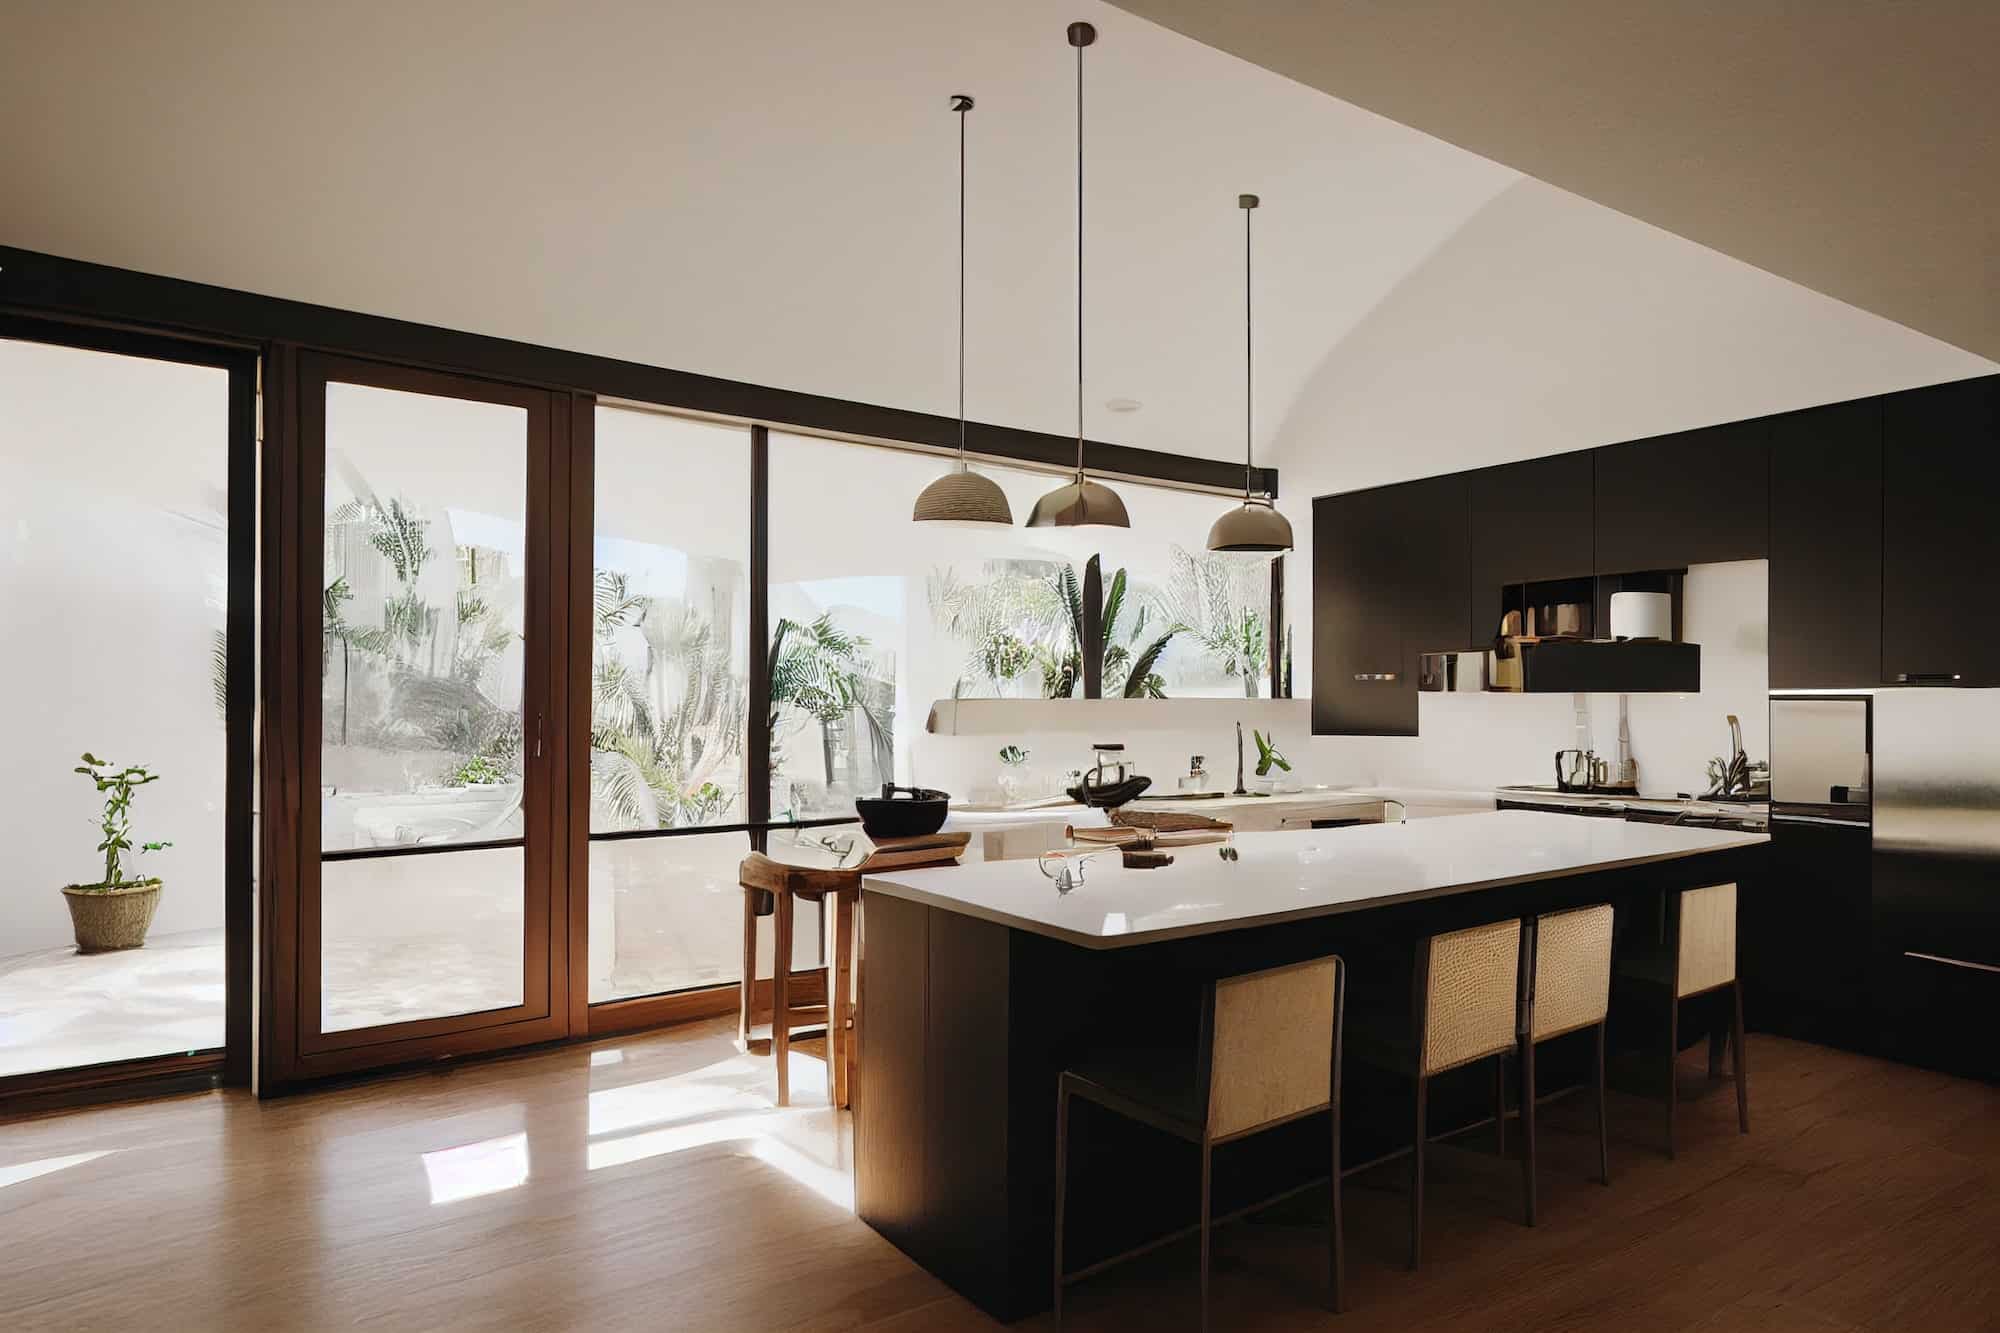 a kitchen in a post modern home in the style of a minimalist architecture wallpaper copy space backg